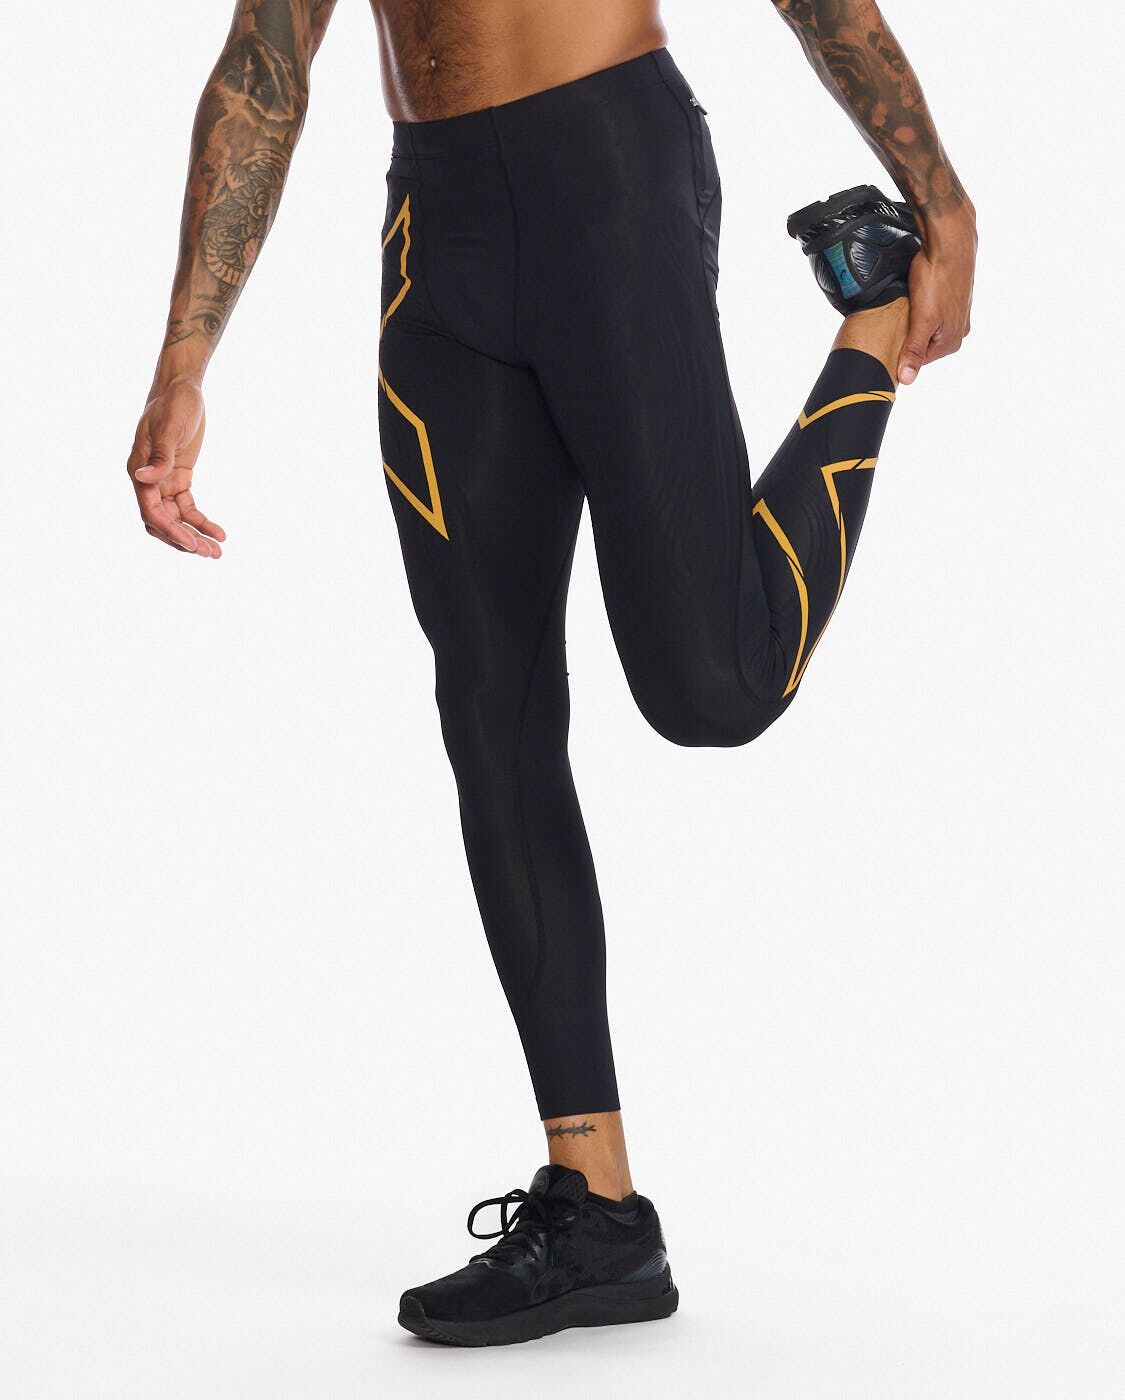 2XU South Africa - Men's Light Speed Compression Tights - Black/Turmeric Reflective